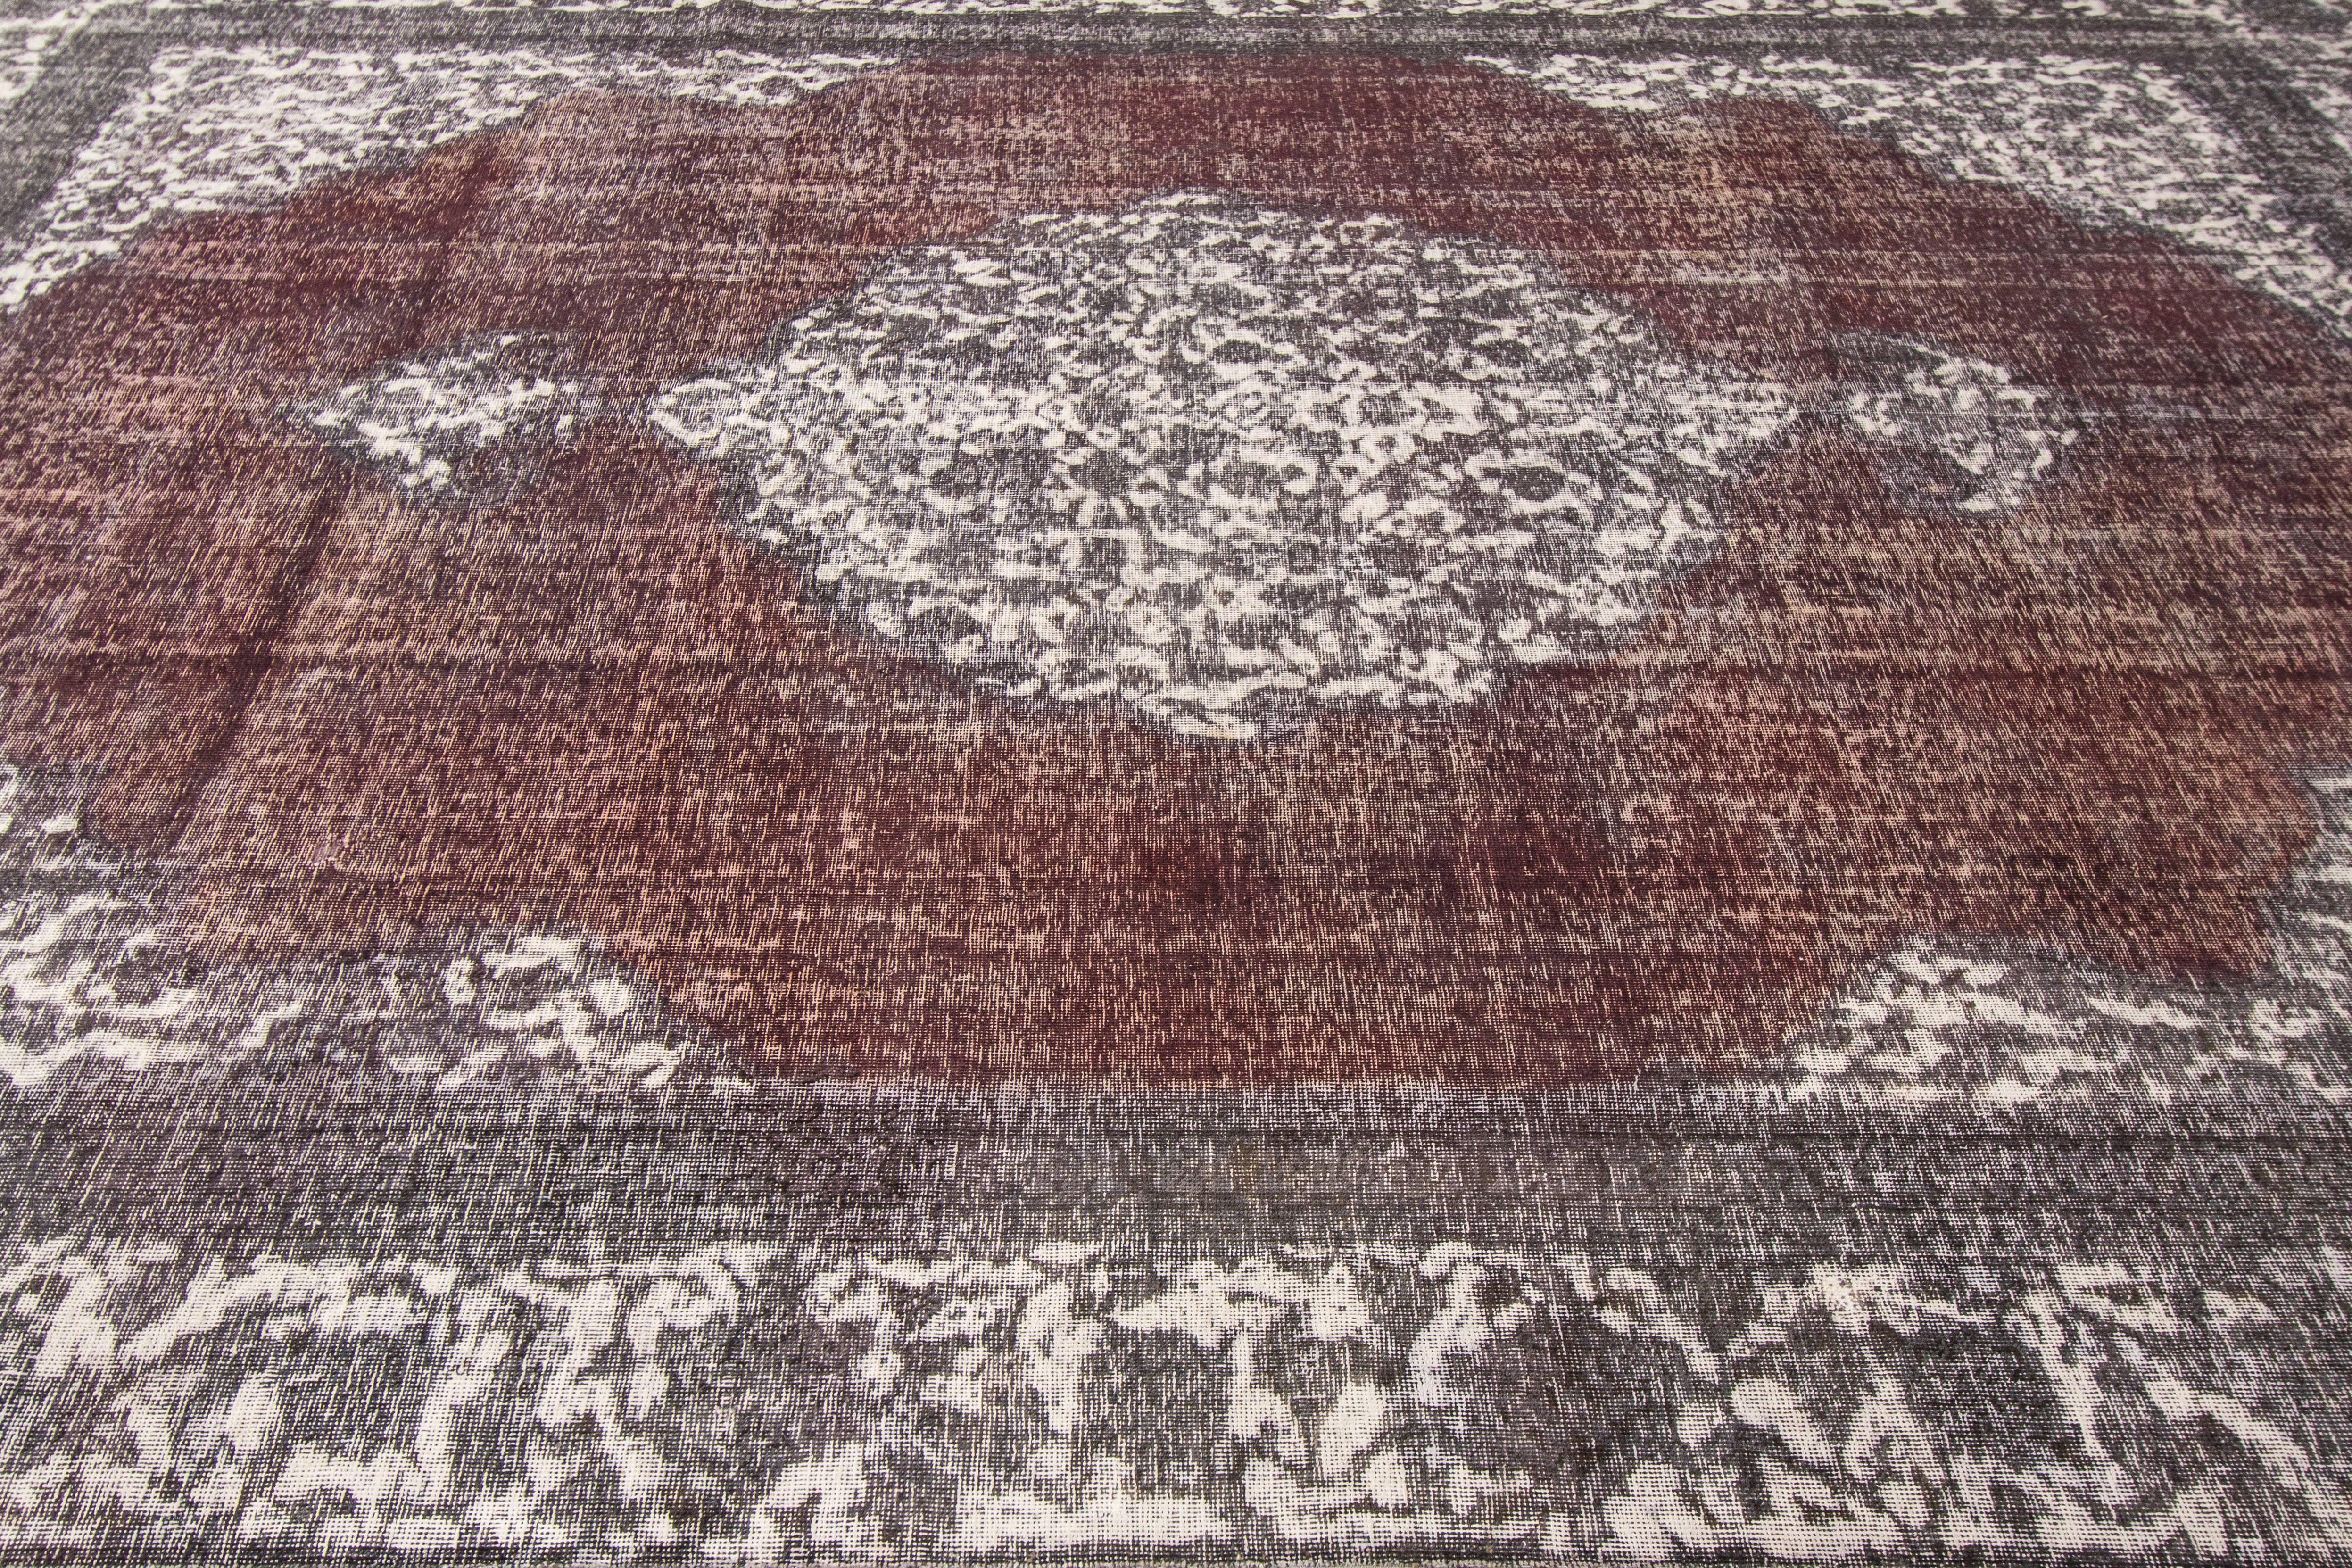 21st century contemporary (2000) Pakistani rug with an overdyed red and gray field and traditional medallion design. Measures 9.09x12.08.